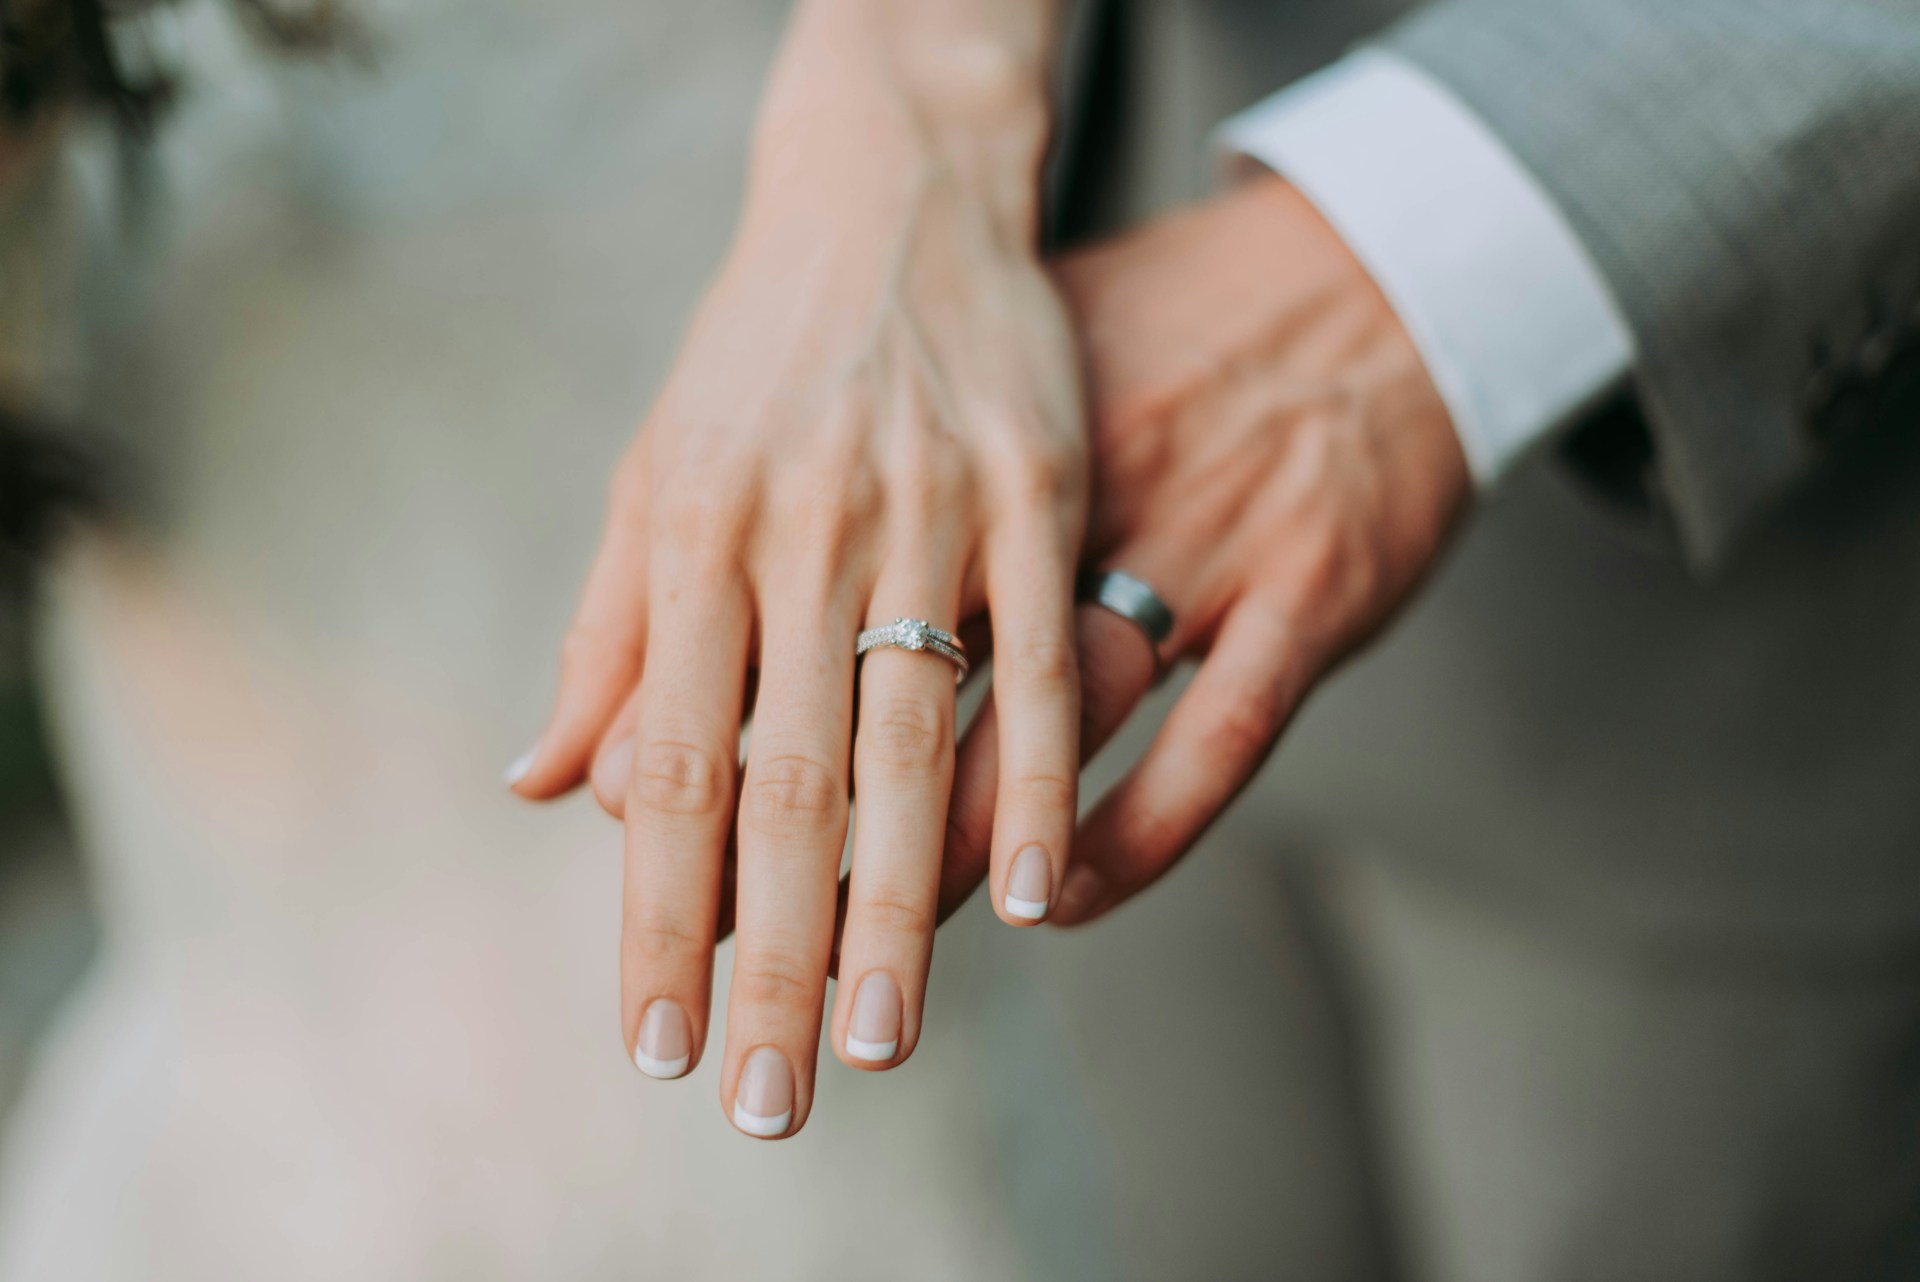 Bride’s and groom’s hands together showing wedding ring and